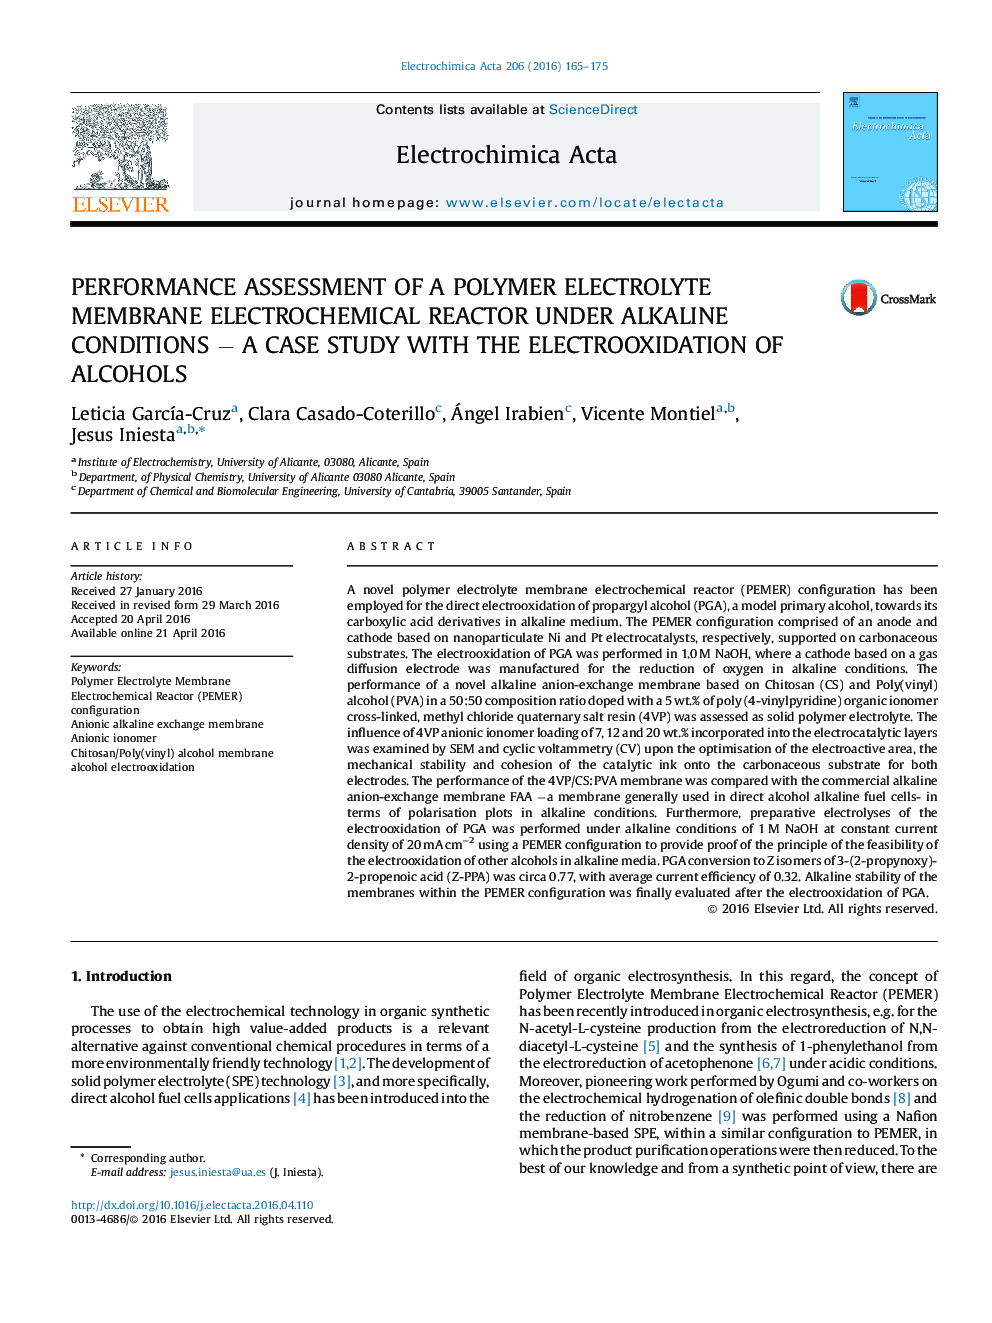 PERFORMANCE ASSESSMENT OF A POLYMER ELECTROLYTE MEMBRANE ELECTROCHEMICAL REACTOR UNDER ALKALINE CONDITIONS â A CASE STUDY WITH THE ELECTROOXIDATION OF ALCOHOLS